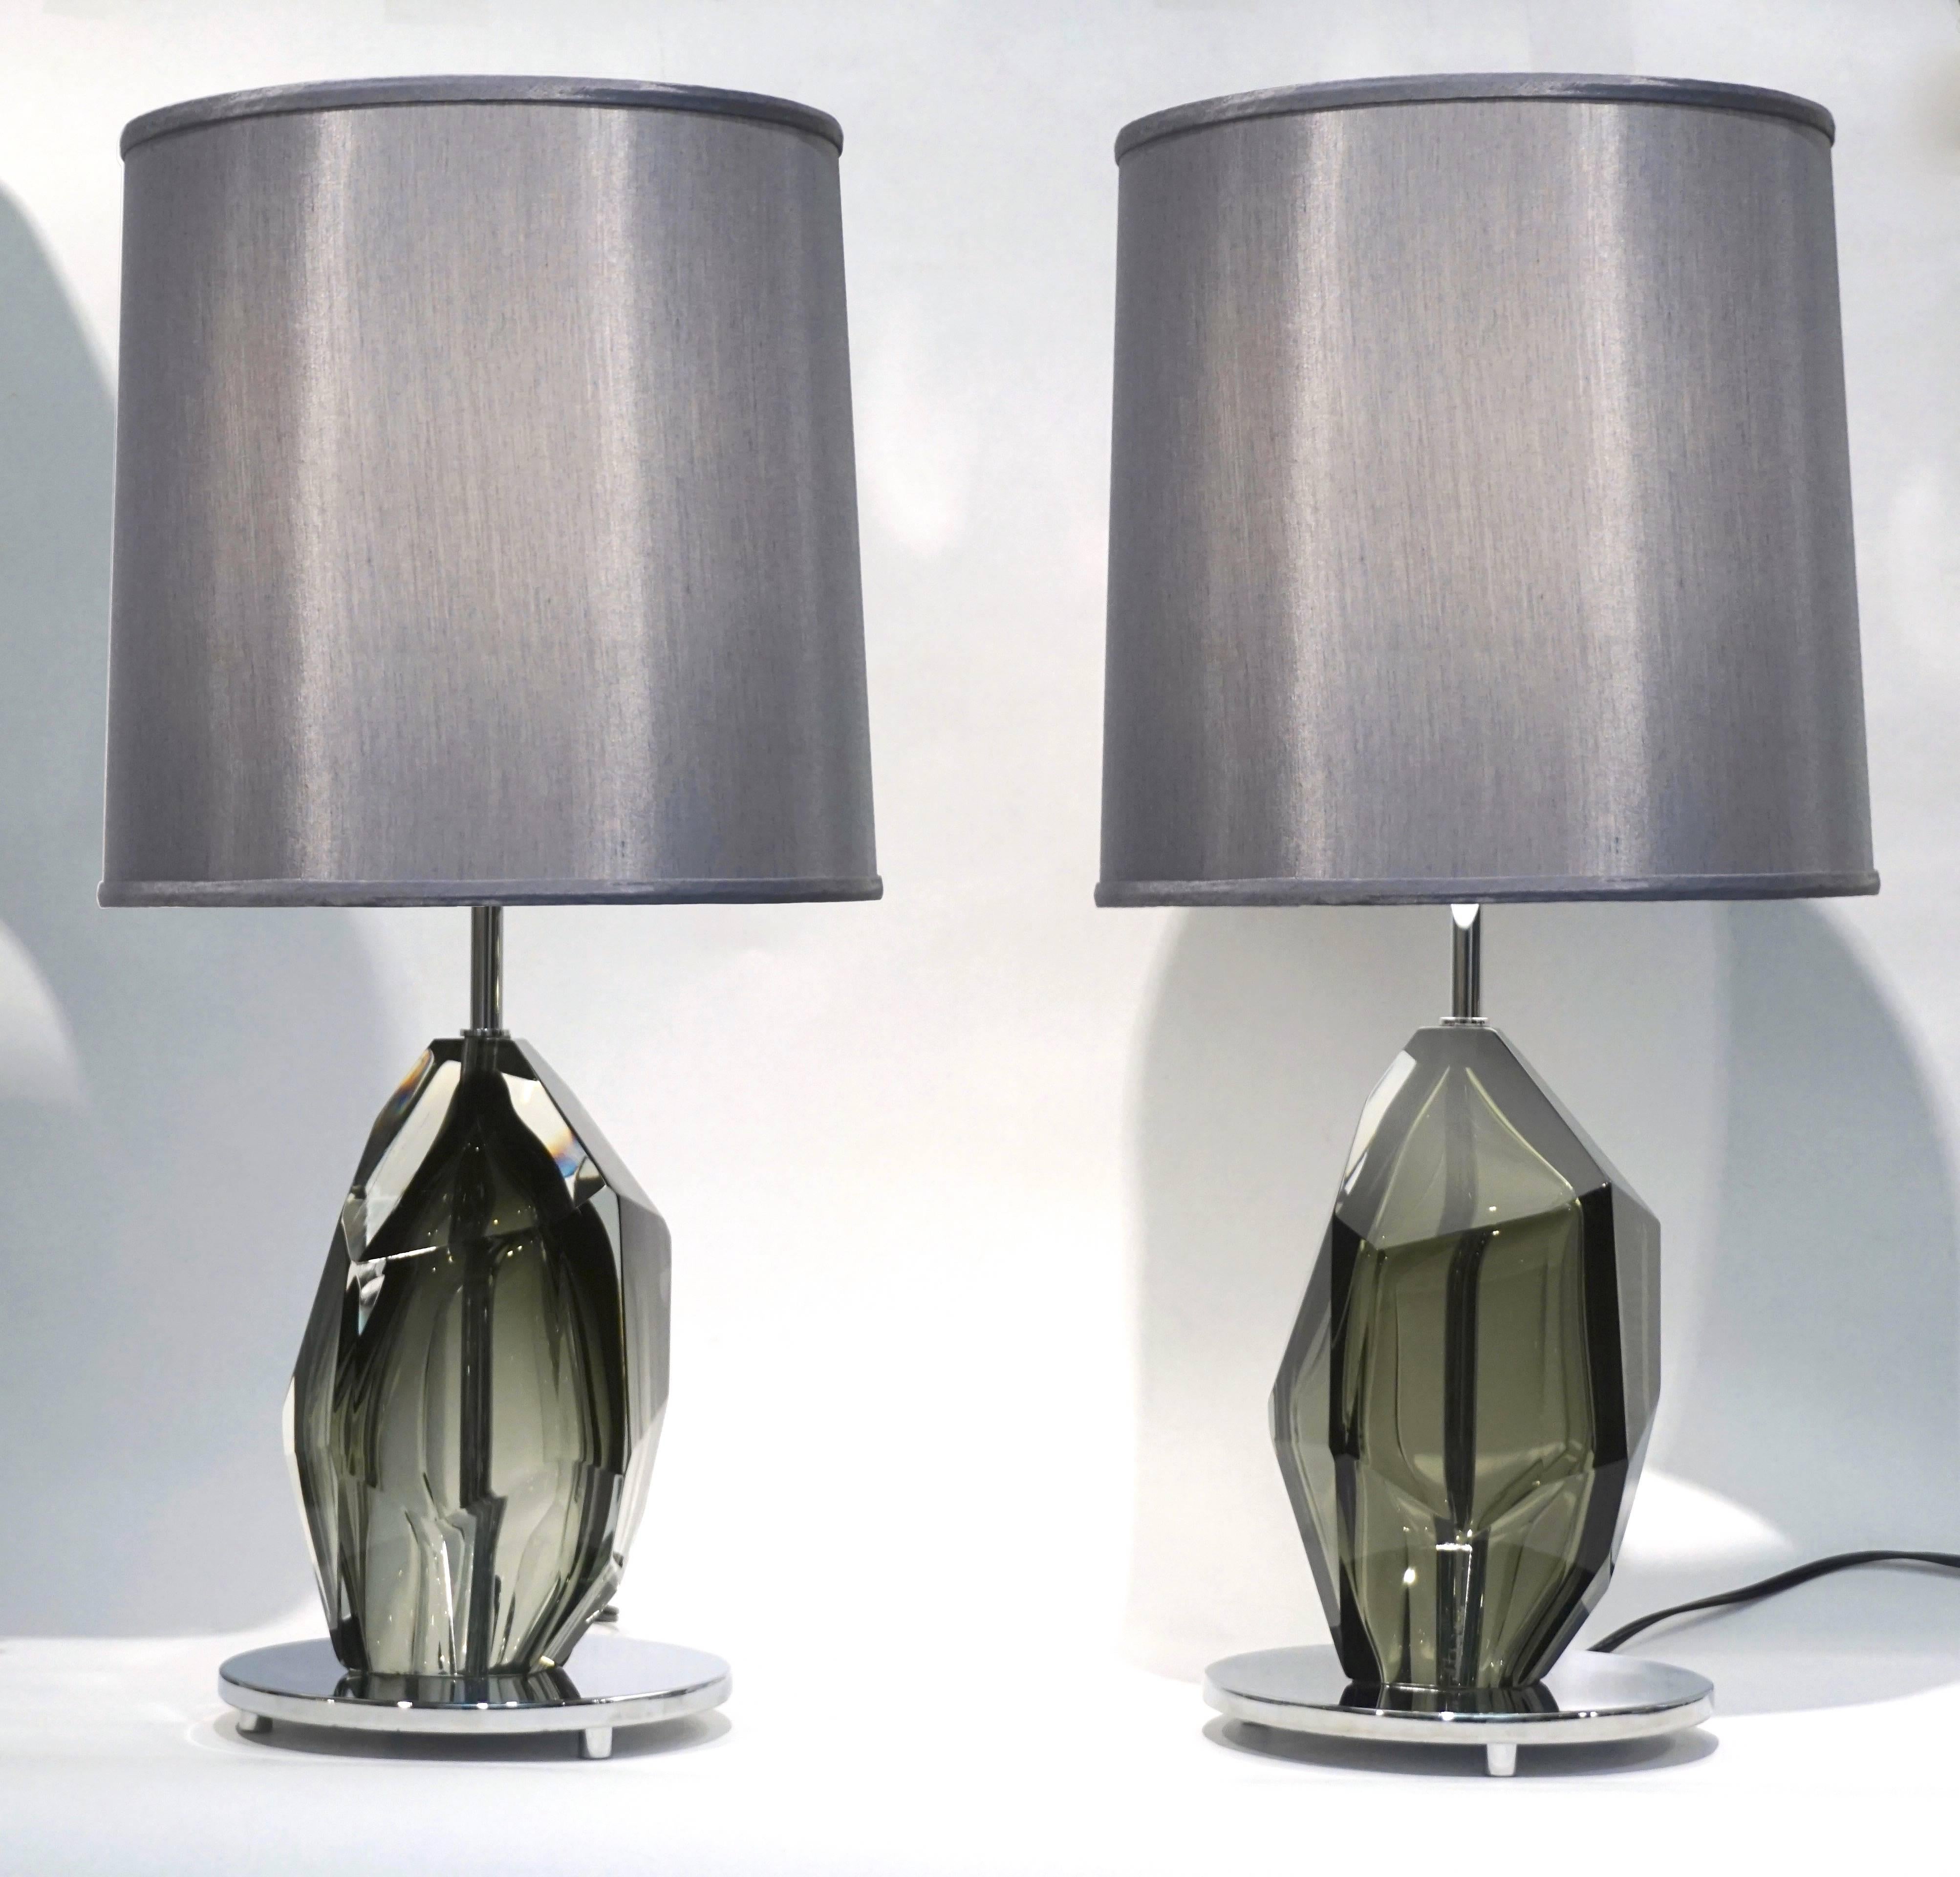 Organic Modern Donà Contemporary Italian Pair of Faceted Solid Rock Smoked Murano Glass Lamps